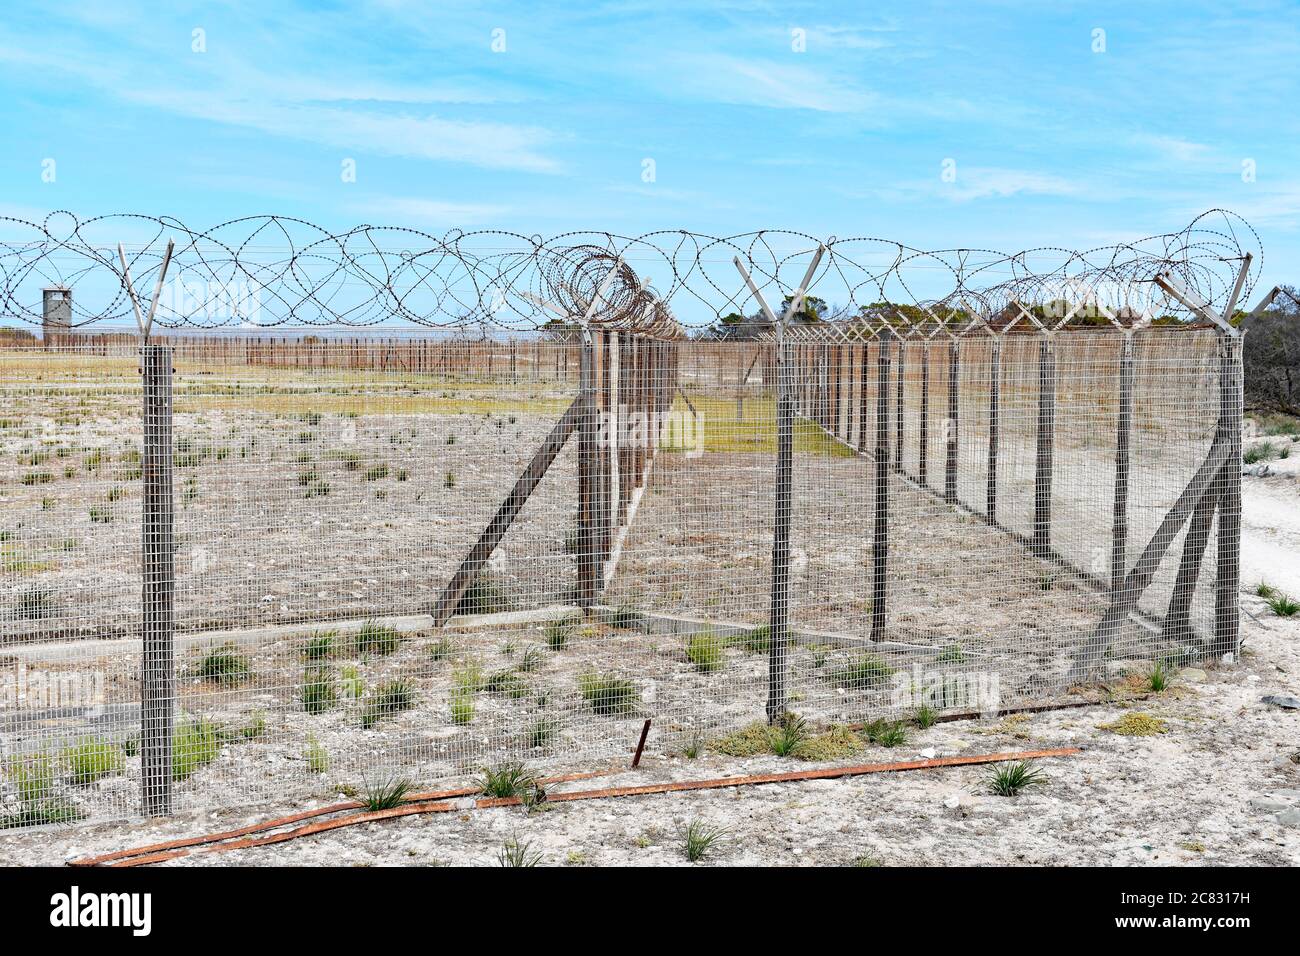 The security fences of the former high security prison on Robben Island.  Barbed wire lines the top of the fence.  Cape Town, South Africa. Stock Photo